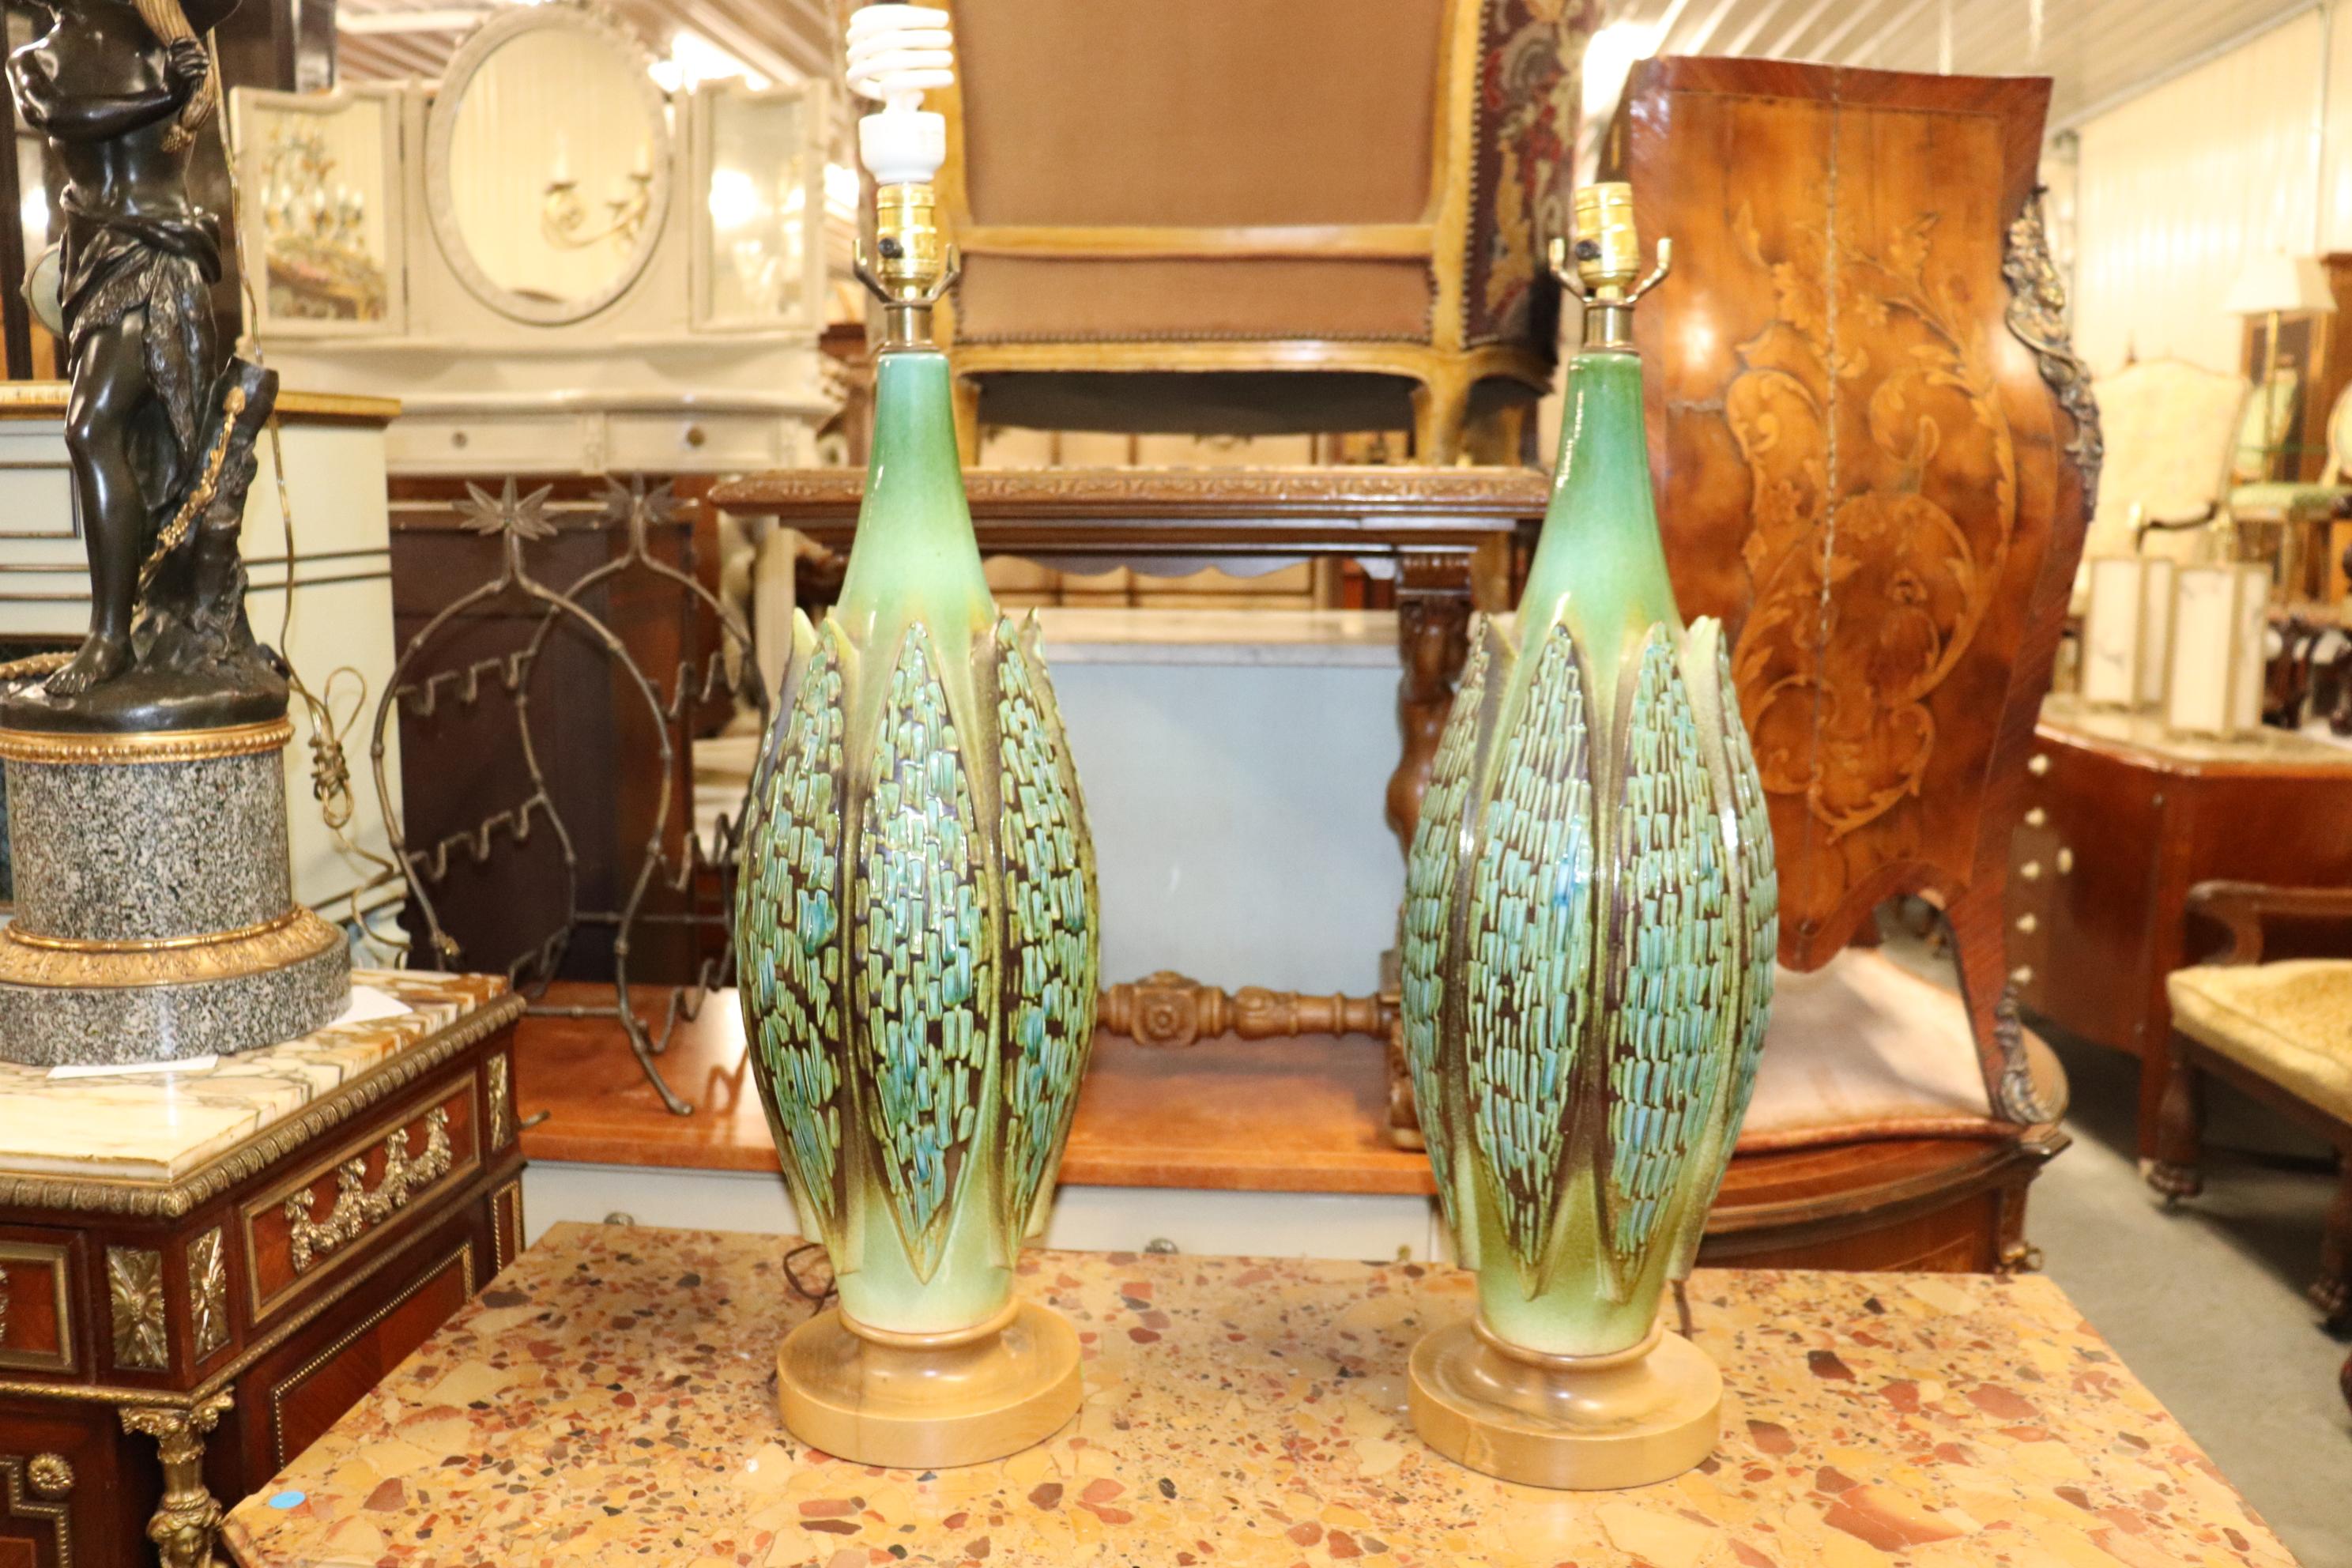 This incredible set of tall linen shade ceramic lamps are in absolutely beautiful condition and measure an imposing 47 inches tall with their shades and 33 tall without them. They are in very good antique vintage condition and date to teh 1950s and